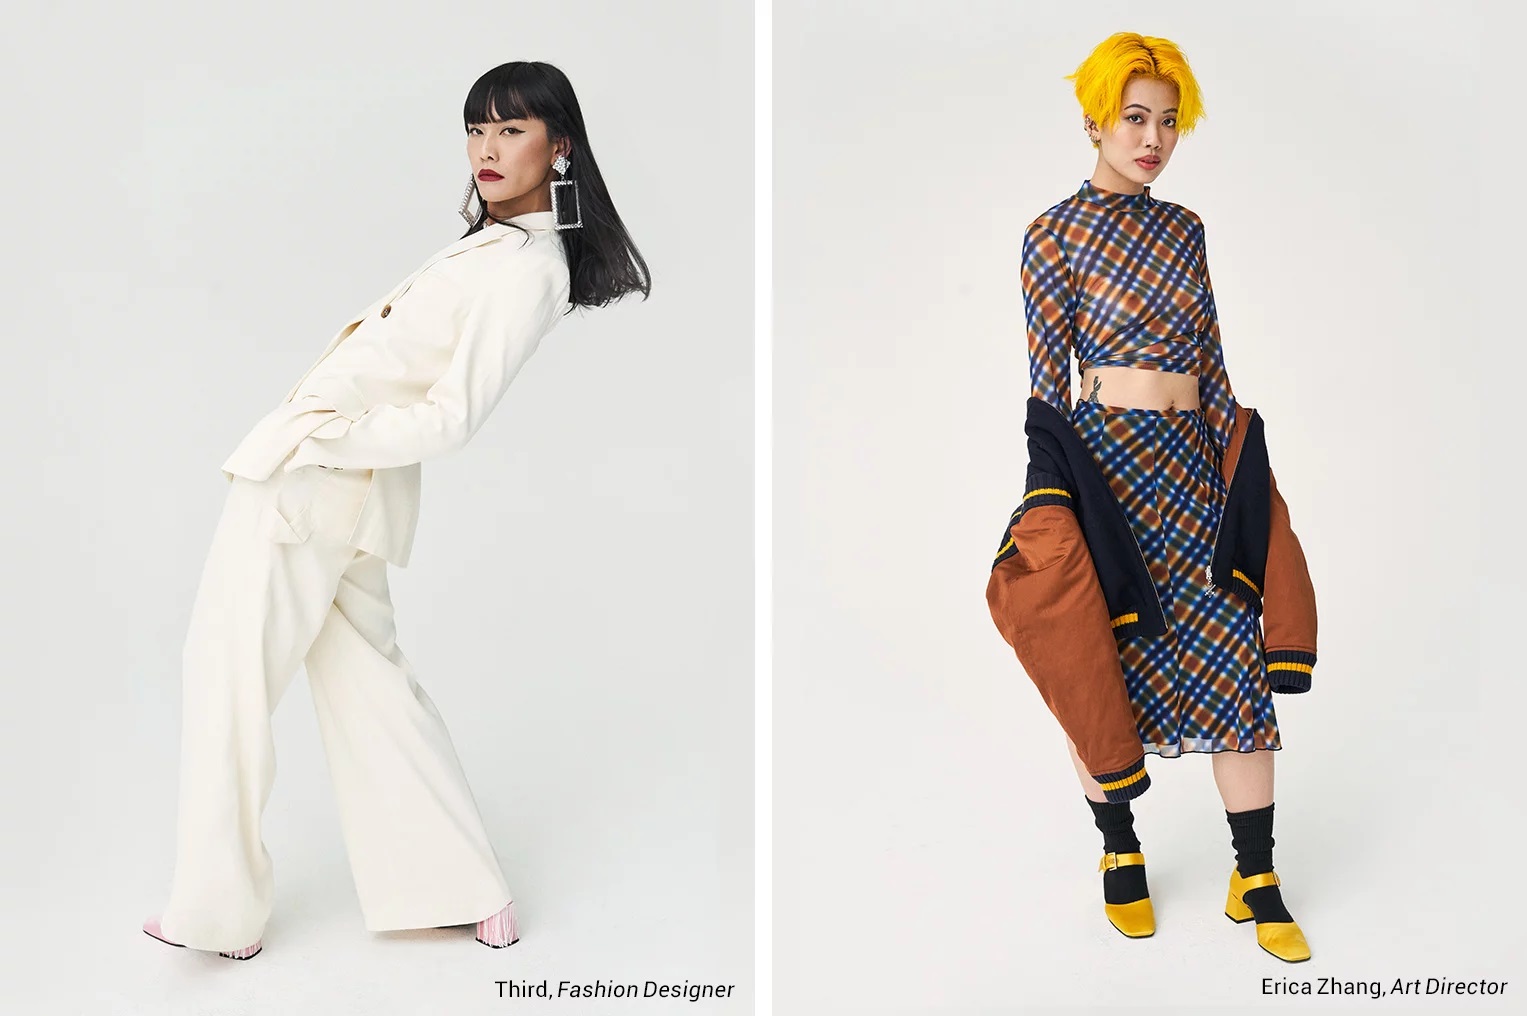 opening ceremony fall winter 2019 lookbook features an all-asian cast inspired by hong kong icons anita mui and leslie cheung - 09.jpg